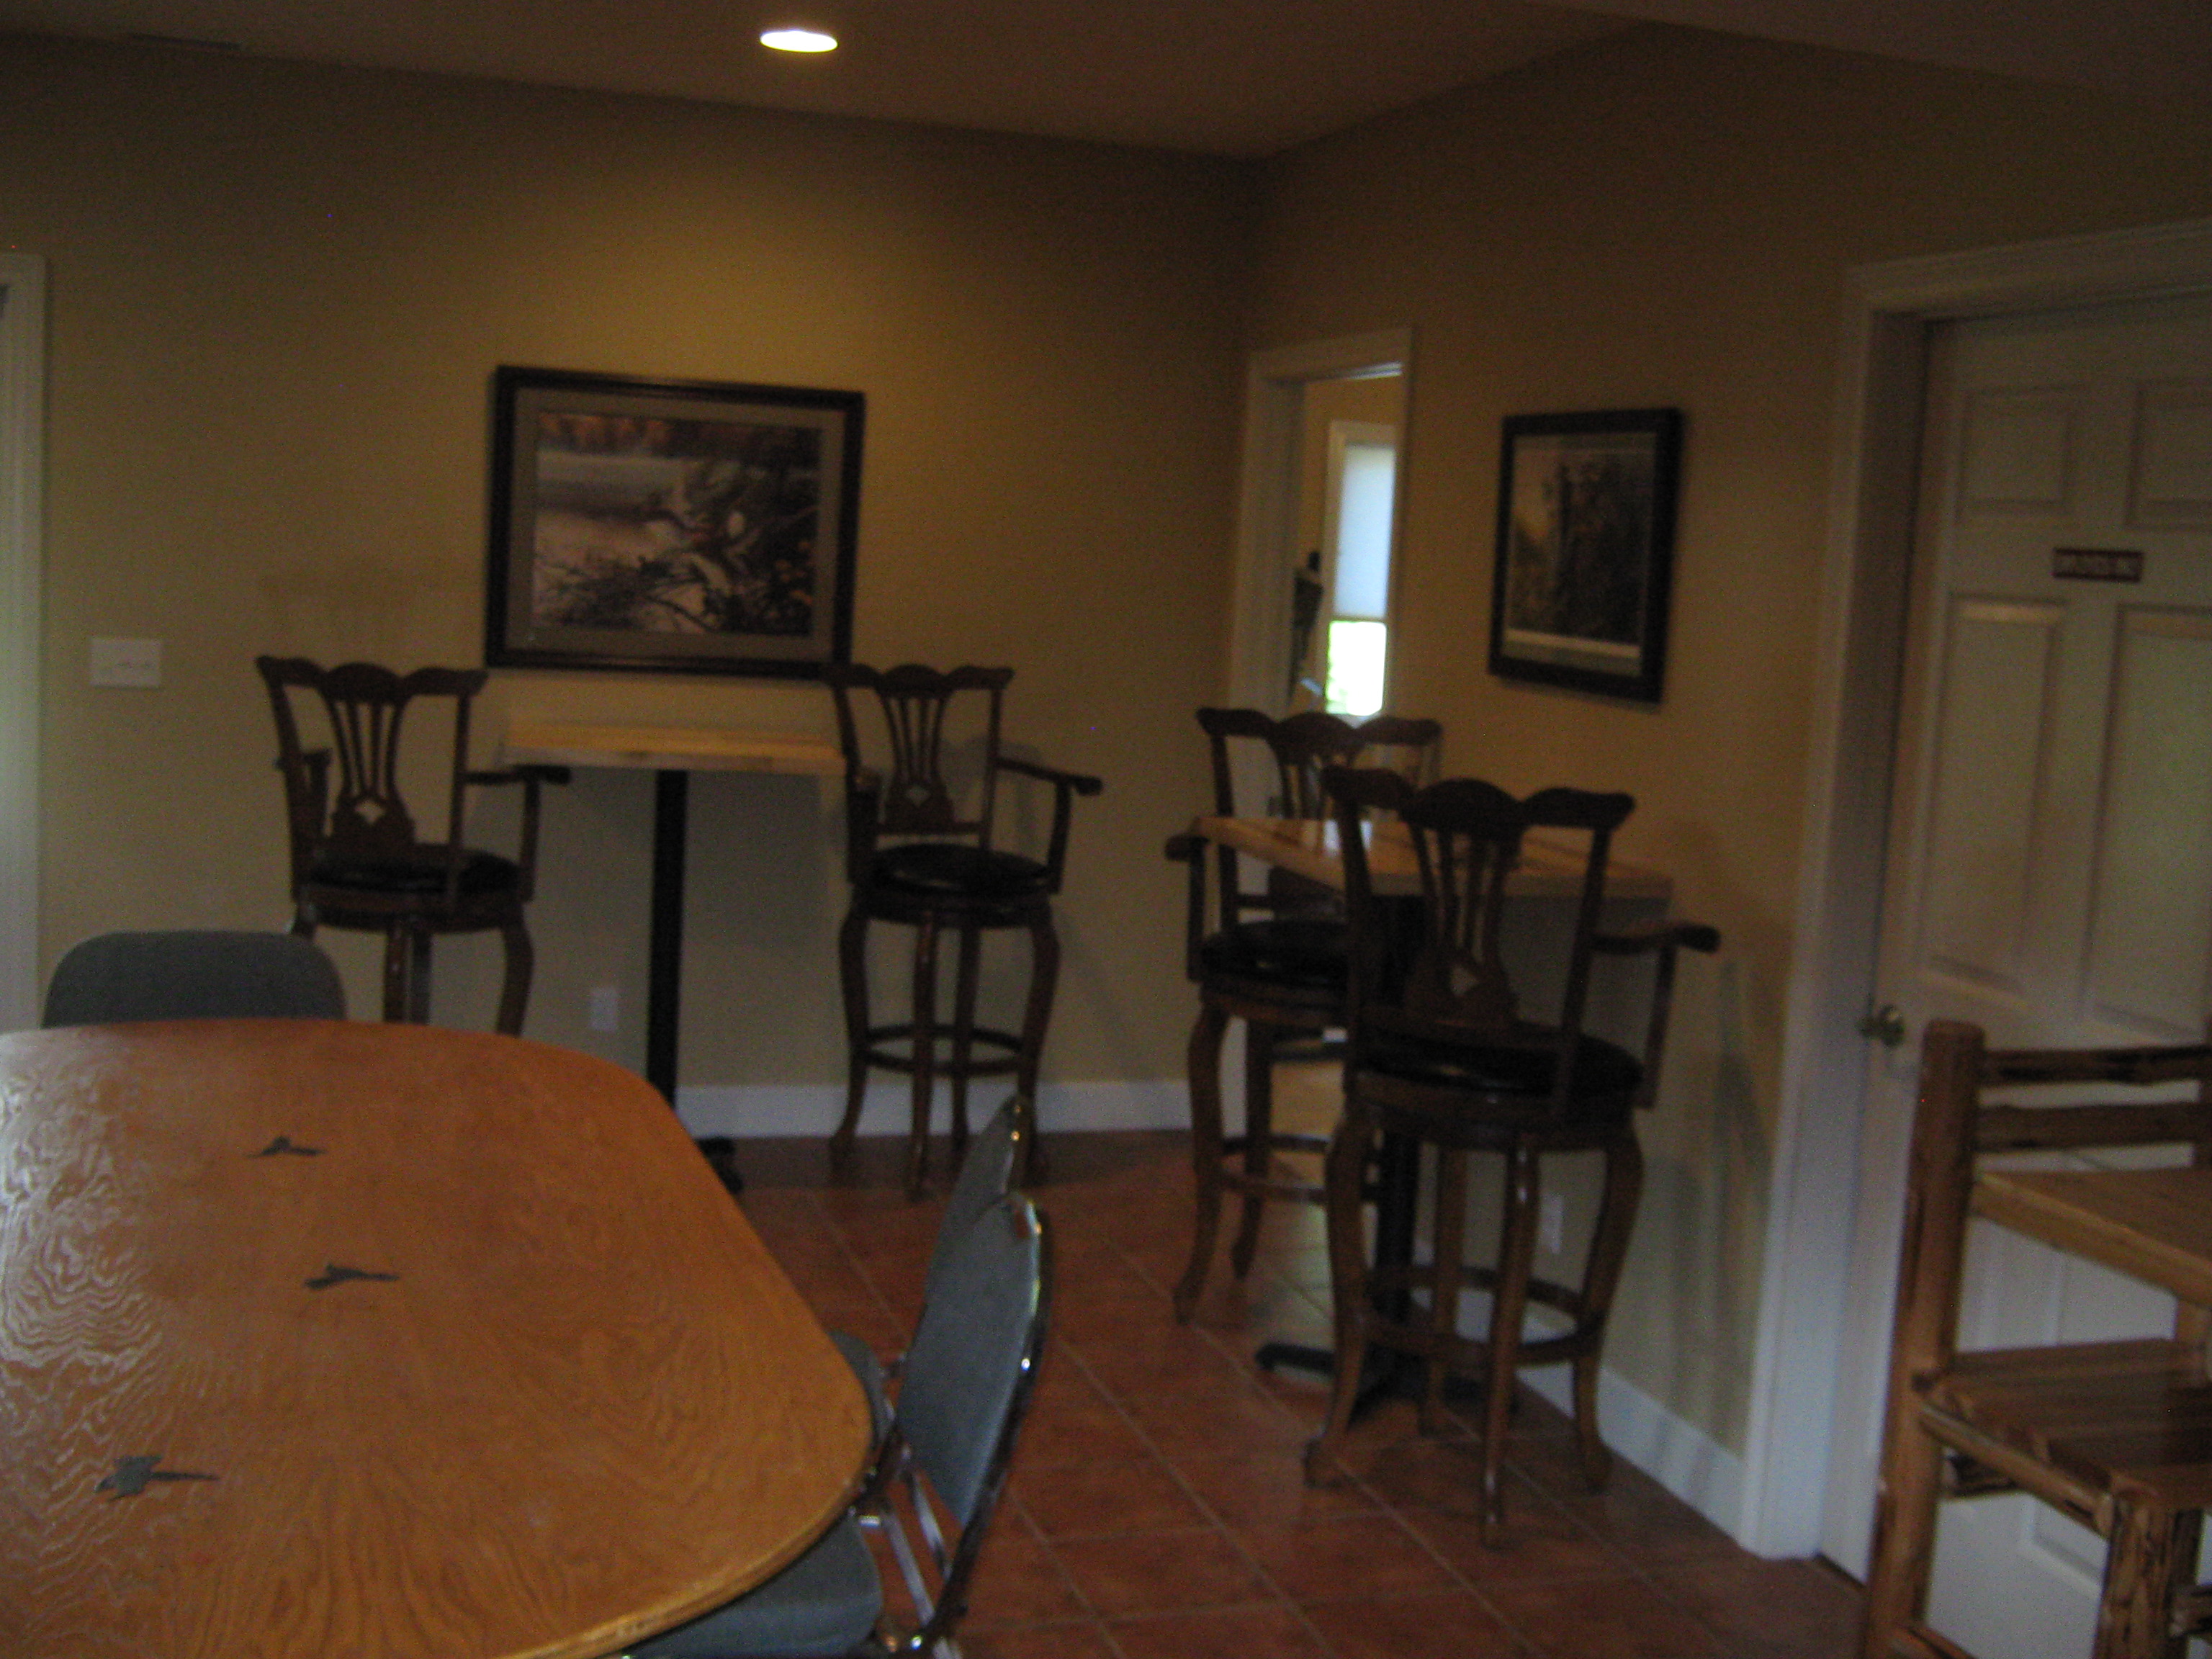 Hummingbird Vineyard and Winery- Indoor seating. Several bar height tables and chairs.